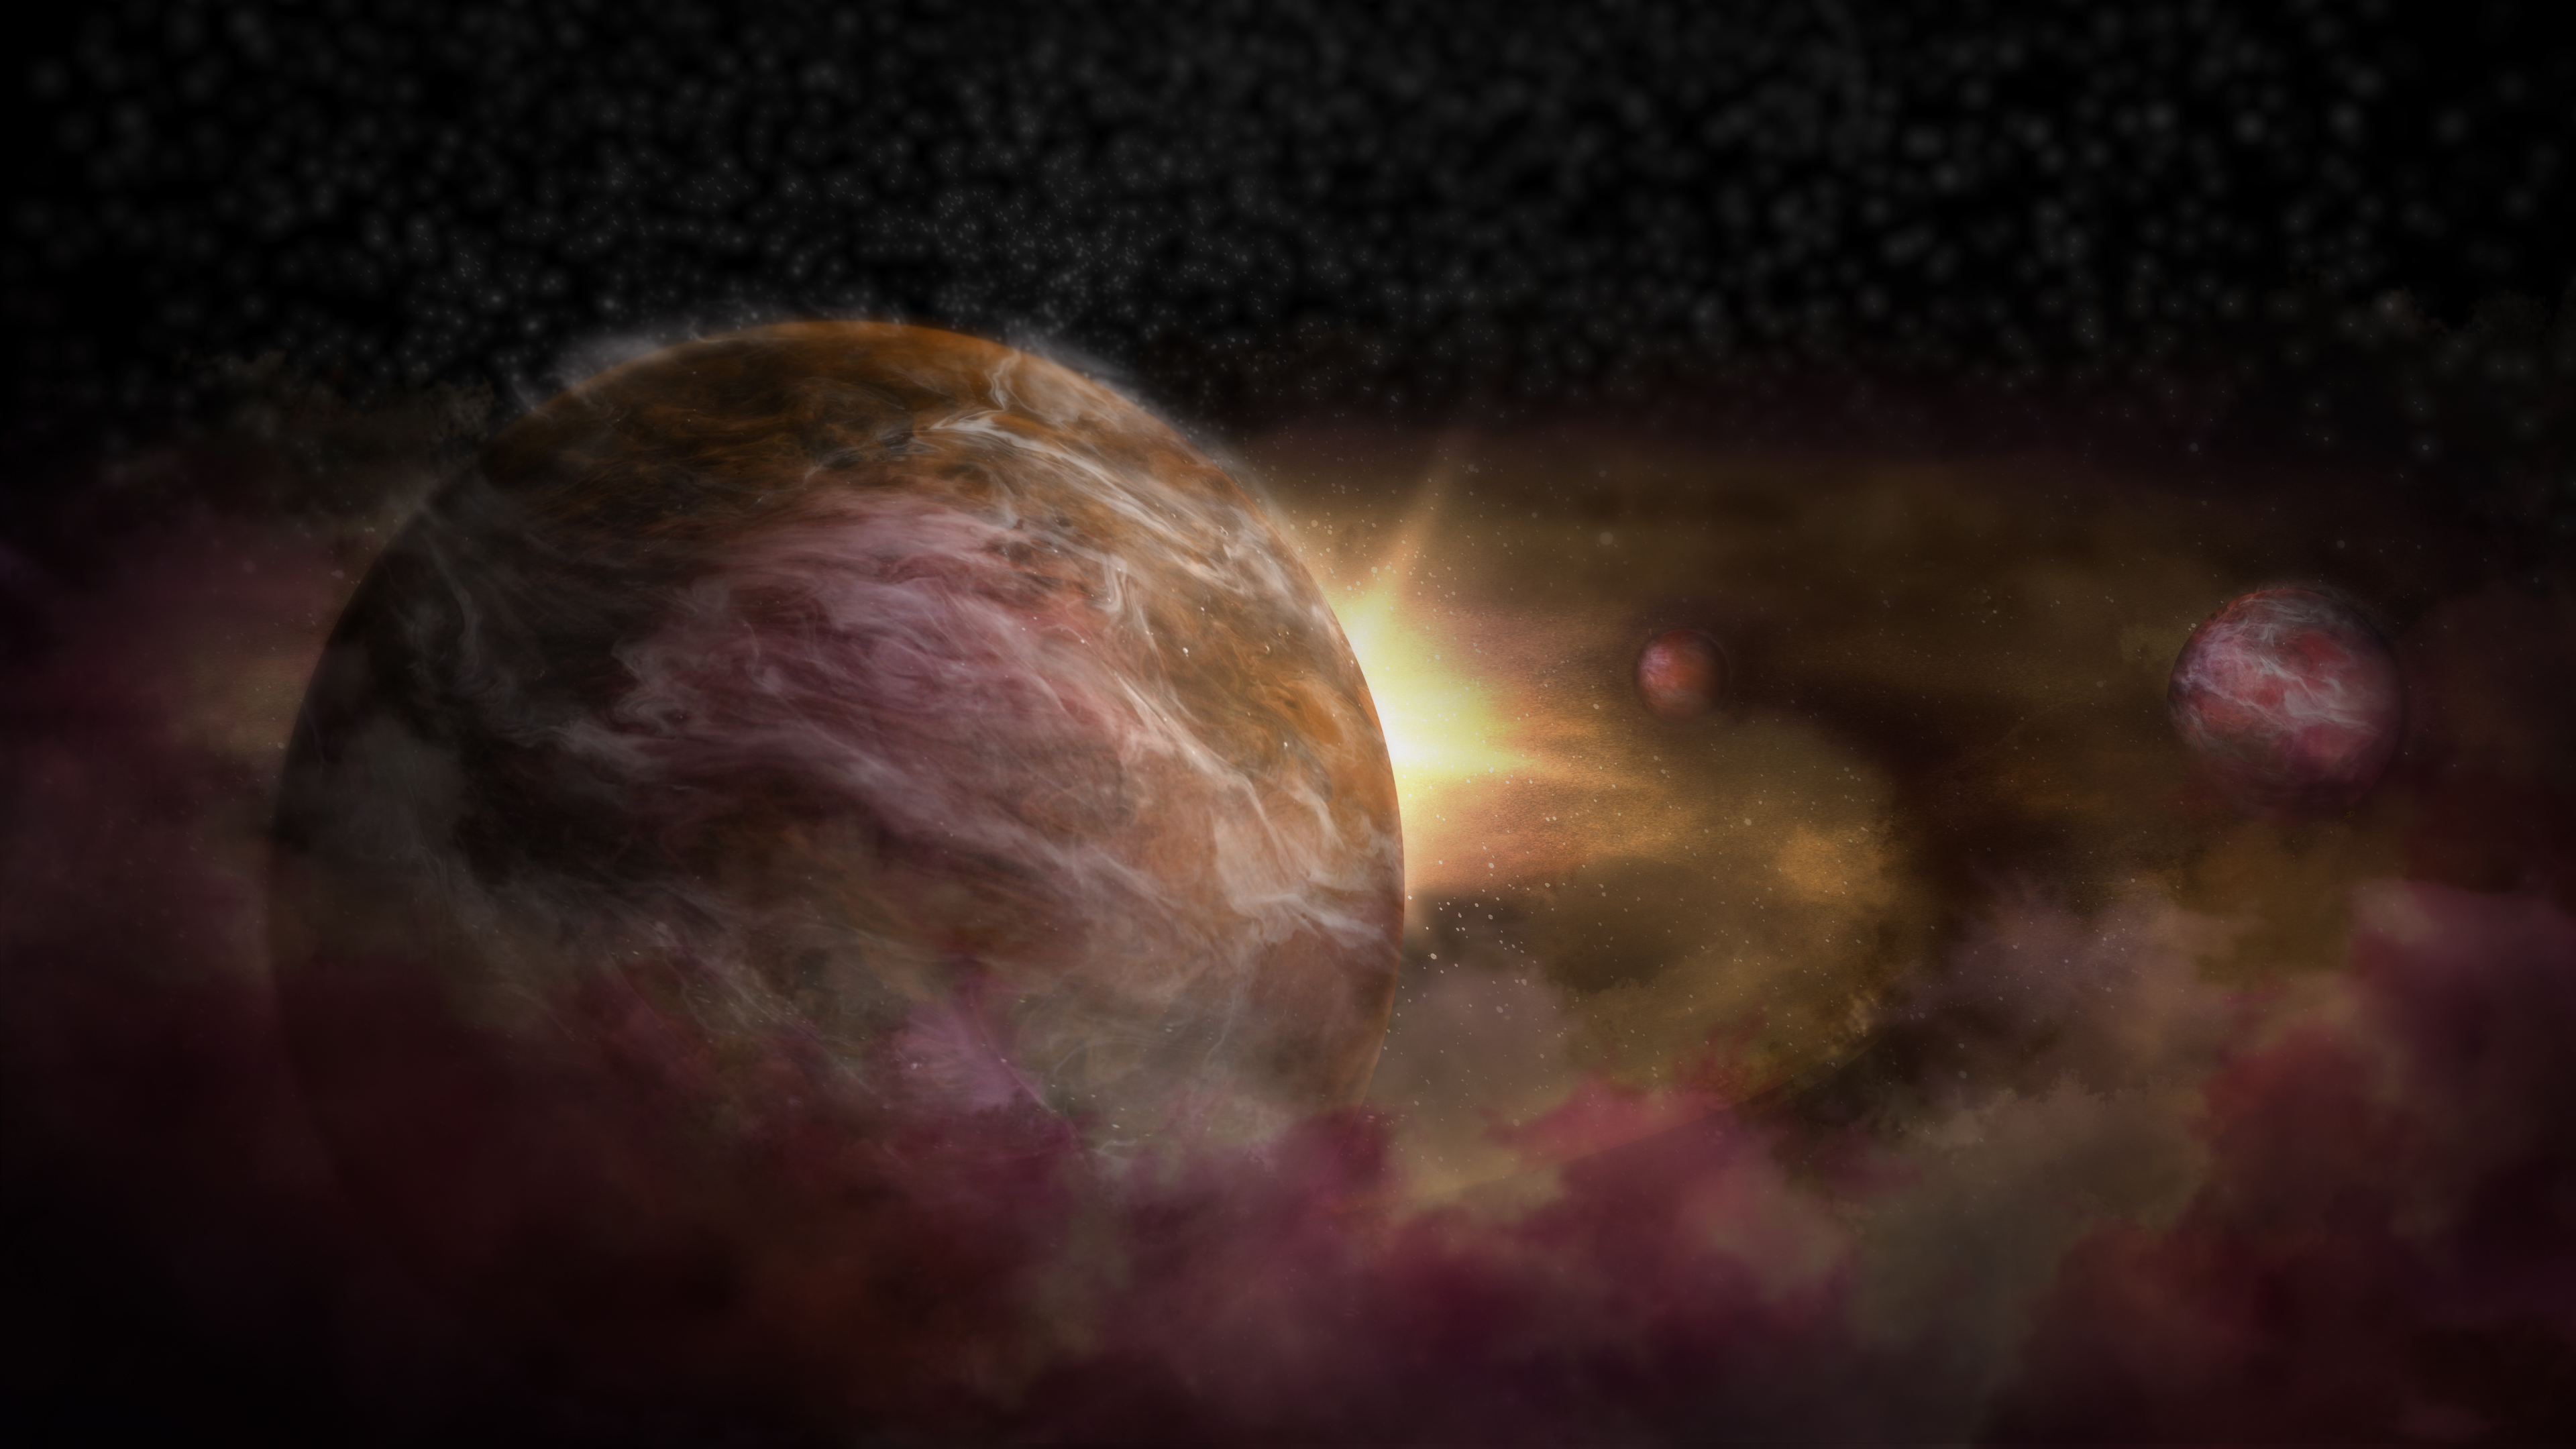 Artist impression of protoplanets forming around a young star.